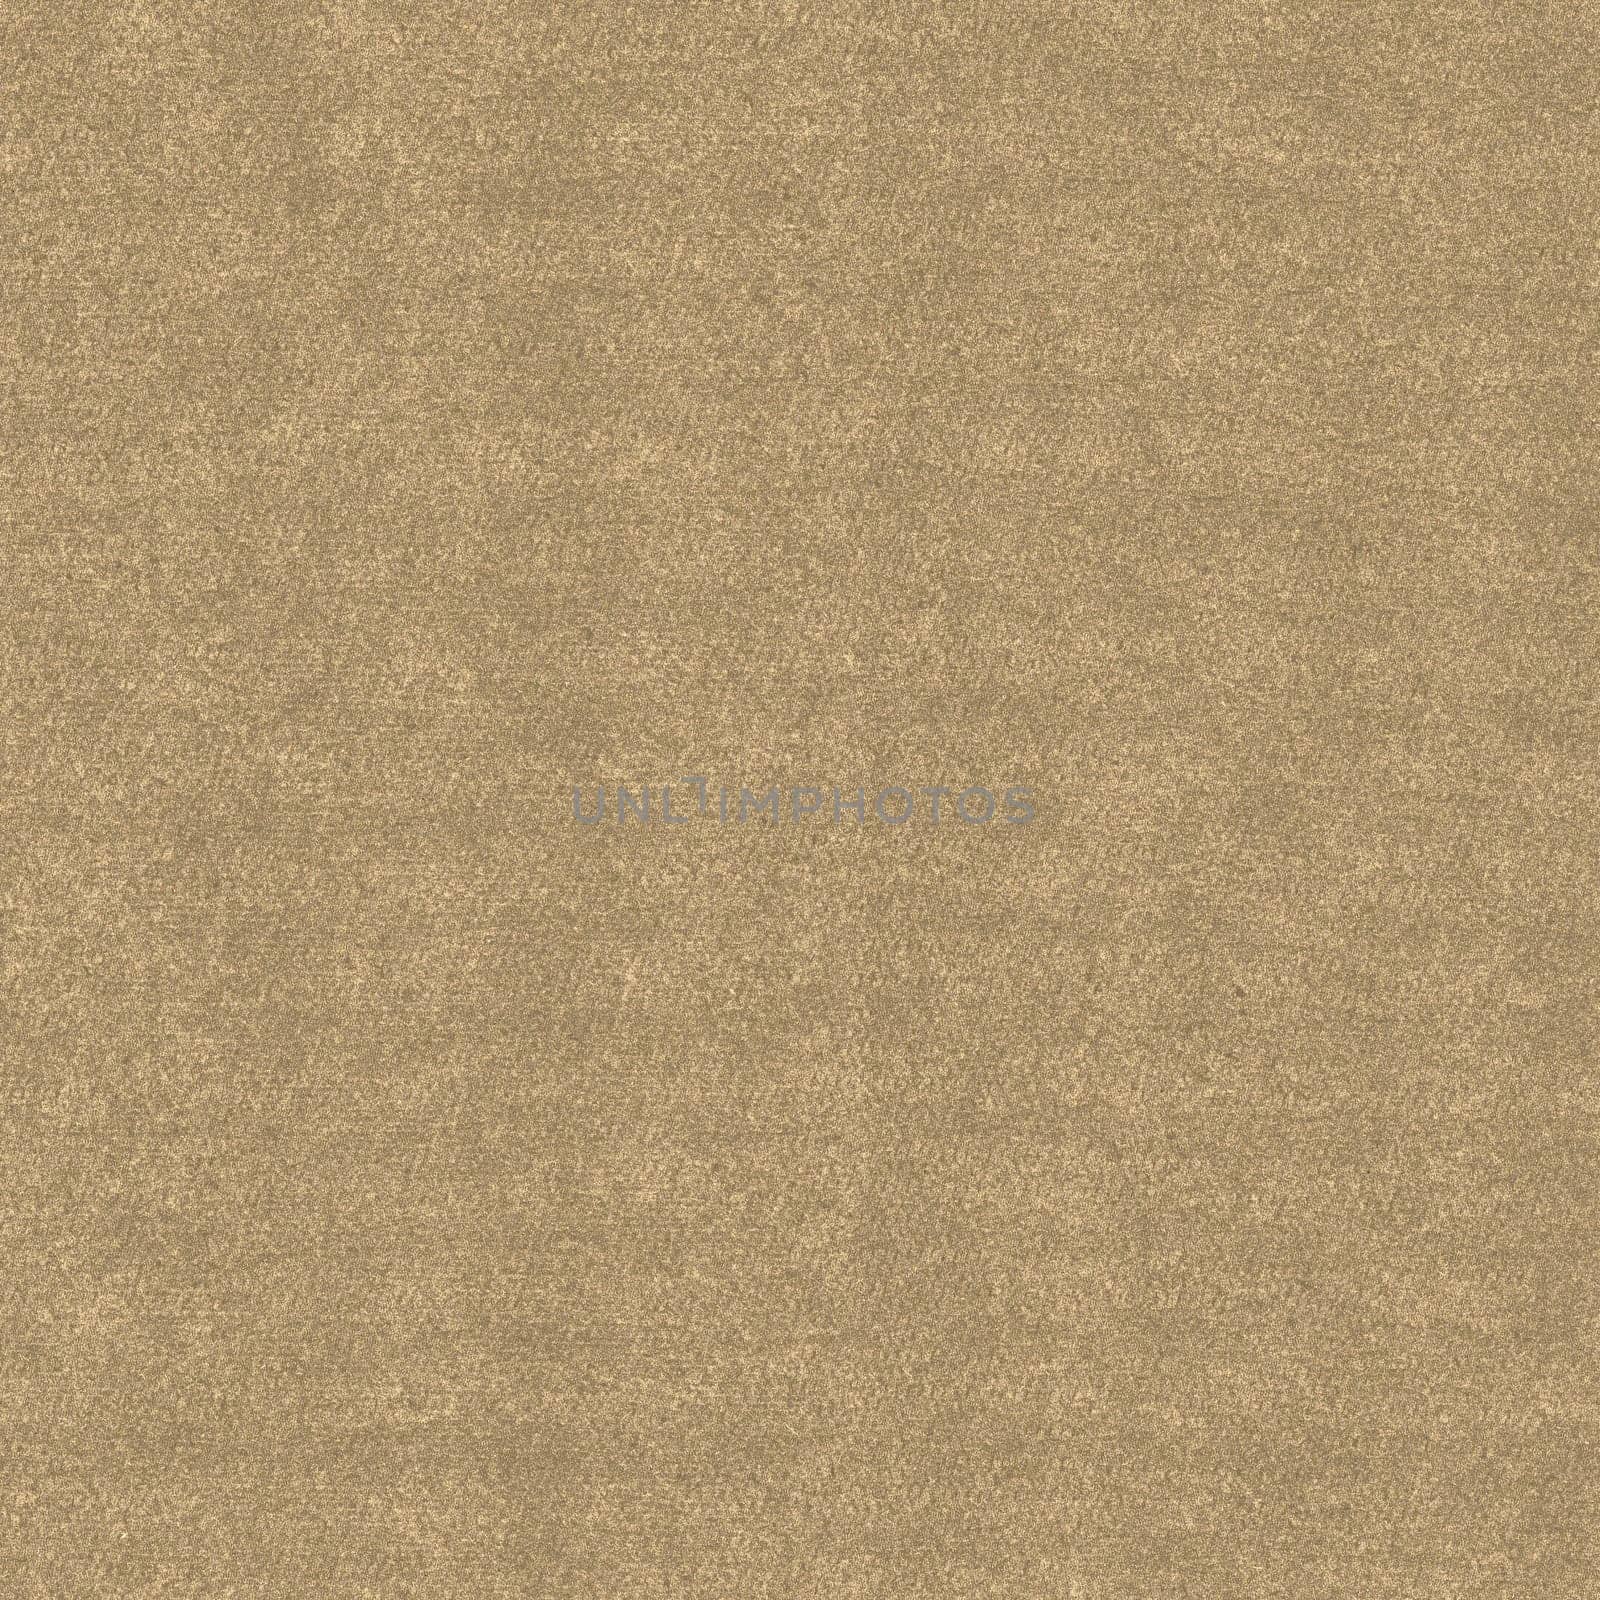 The texture of the background is light brown with a rough and embossed surface with mottled inclusions